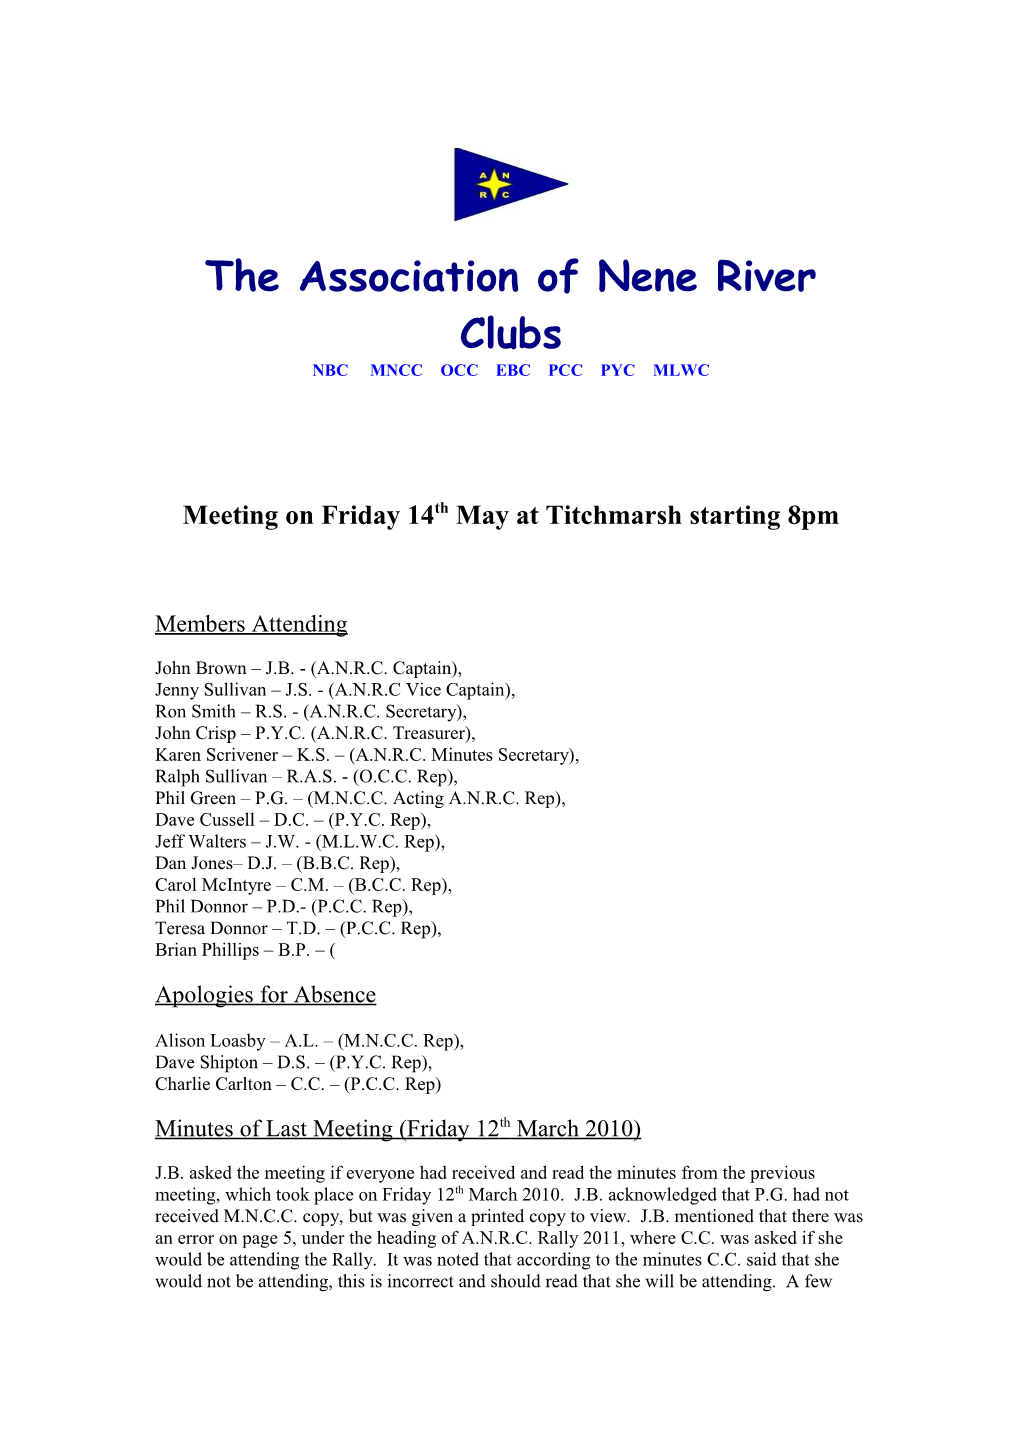 The Association of Nene River Clubs